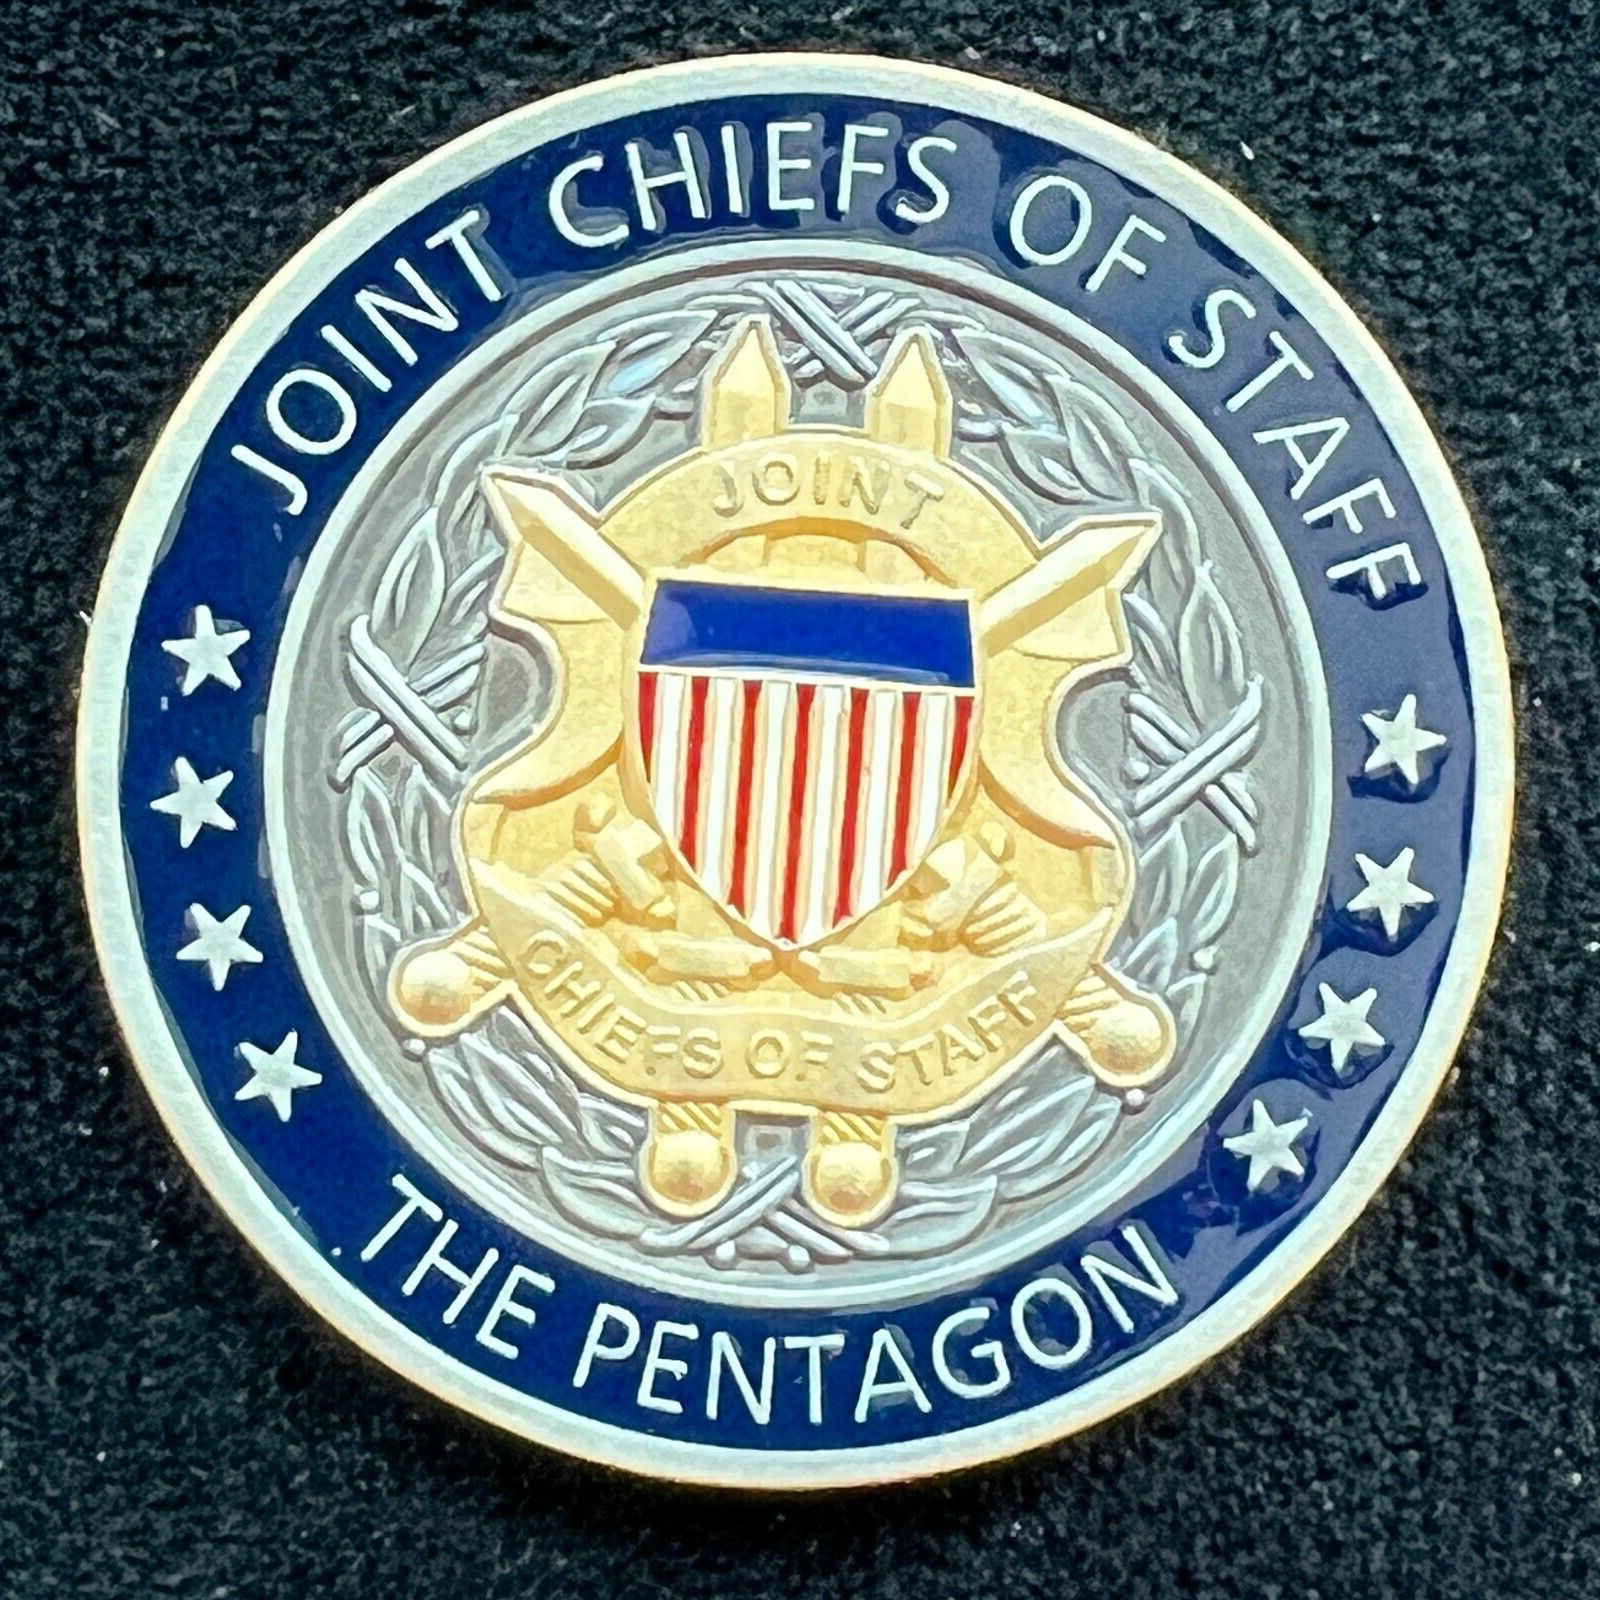 Joint Chief of Staff The Pentagon Challenge Coin